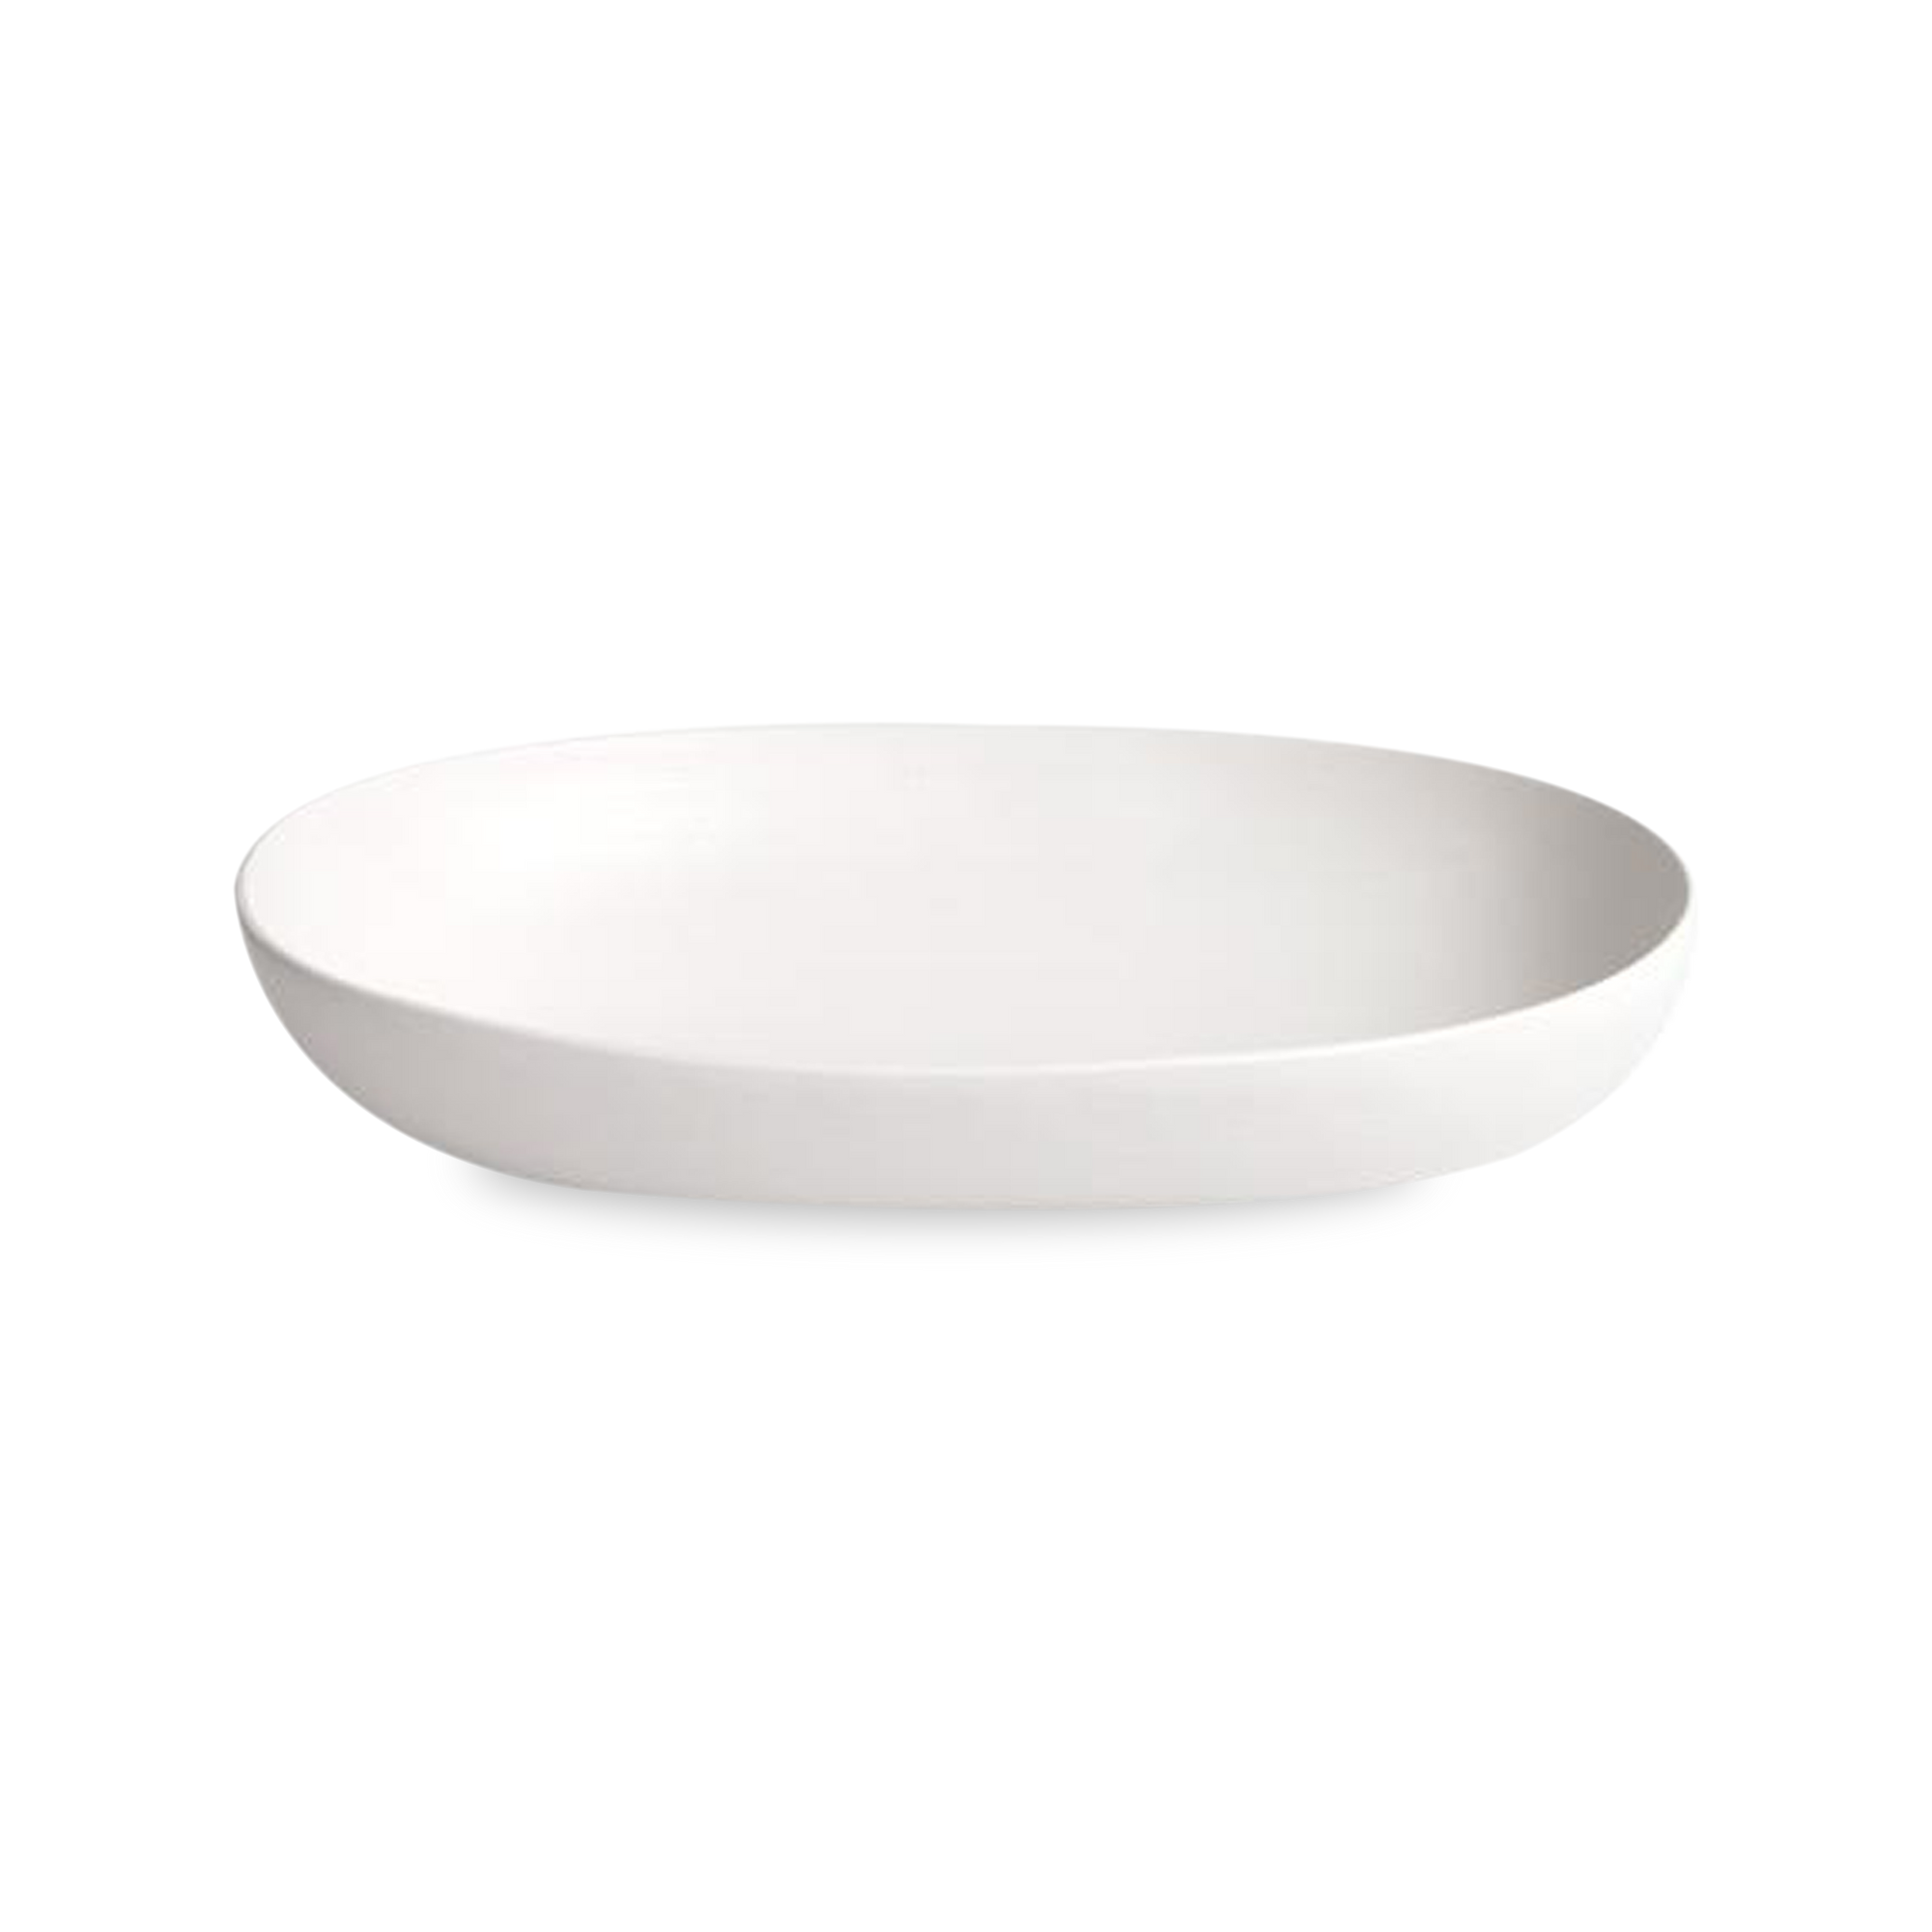 The Quad Platter is completely handmade in Italy and is characterized by simple lines, organic colours and shapes inspired by nature.